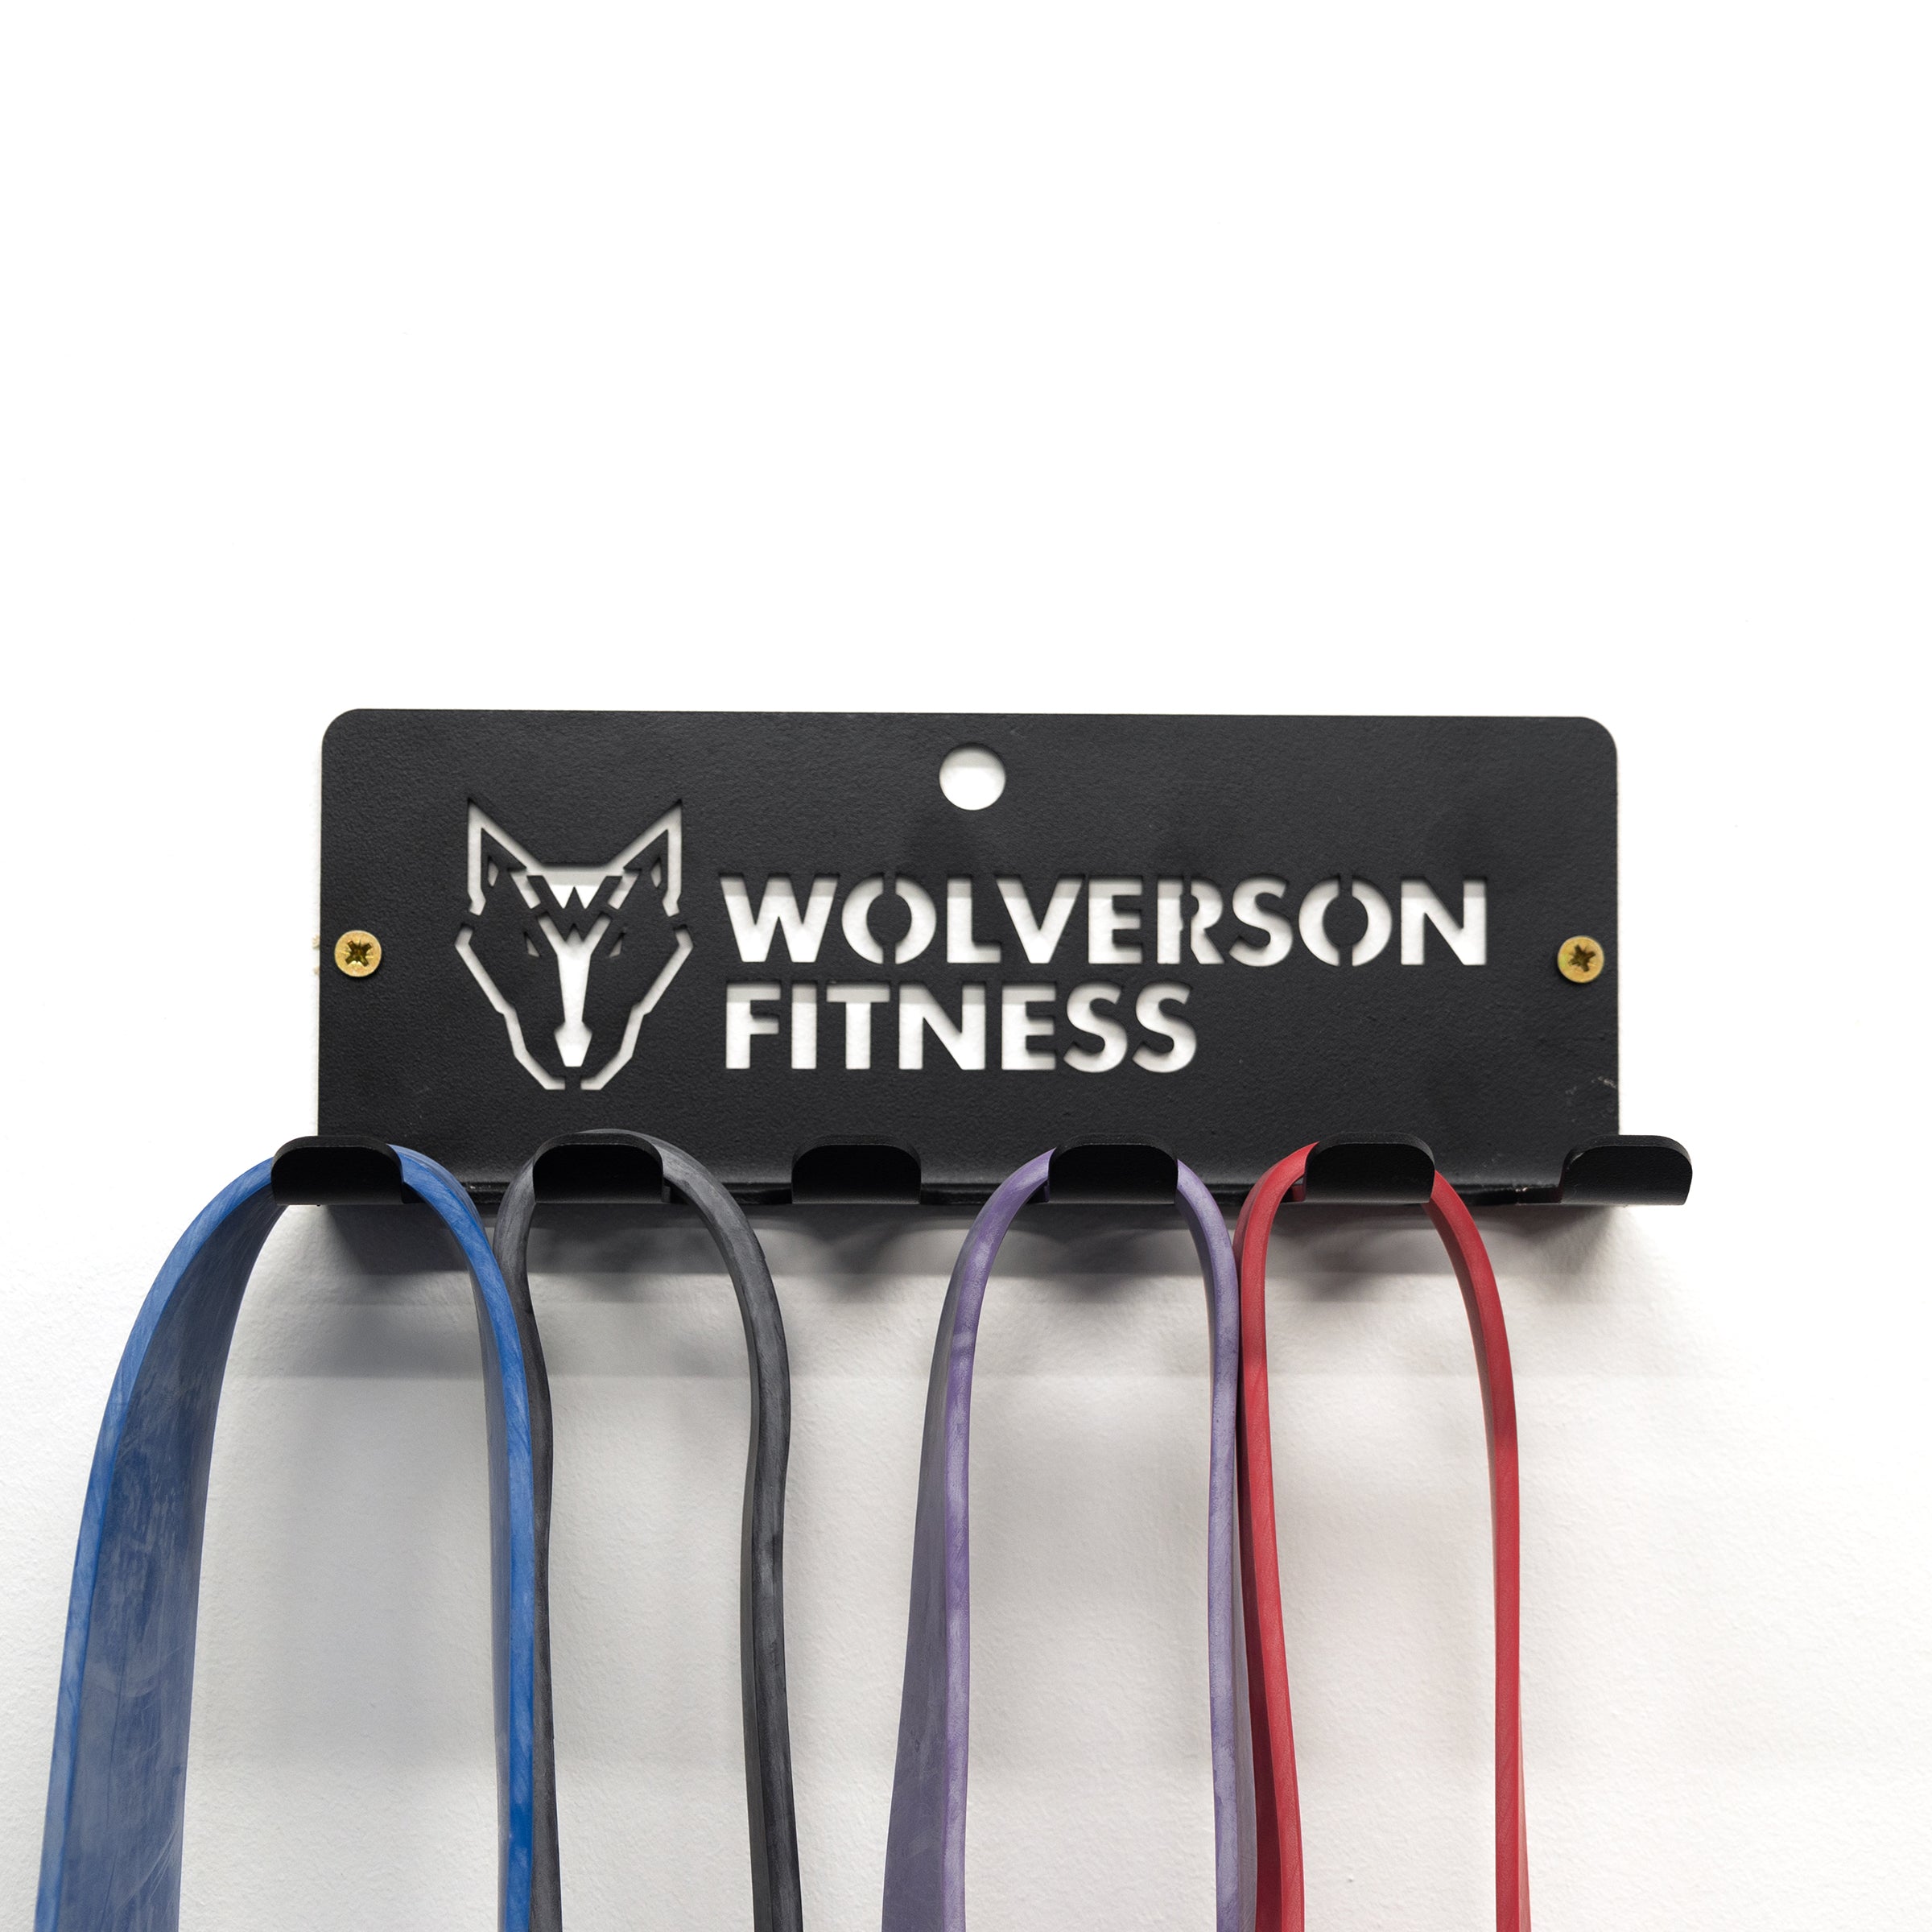 Wolverson Wall Band Holder